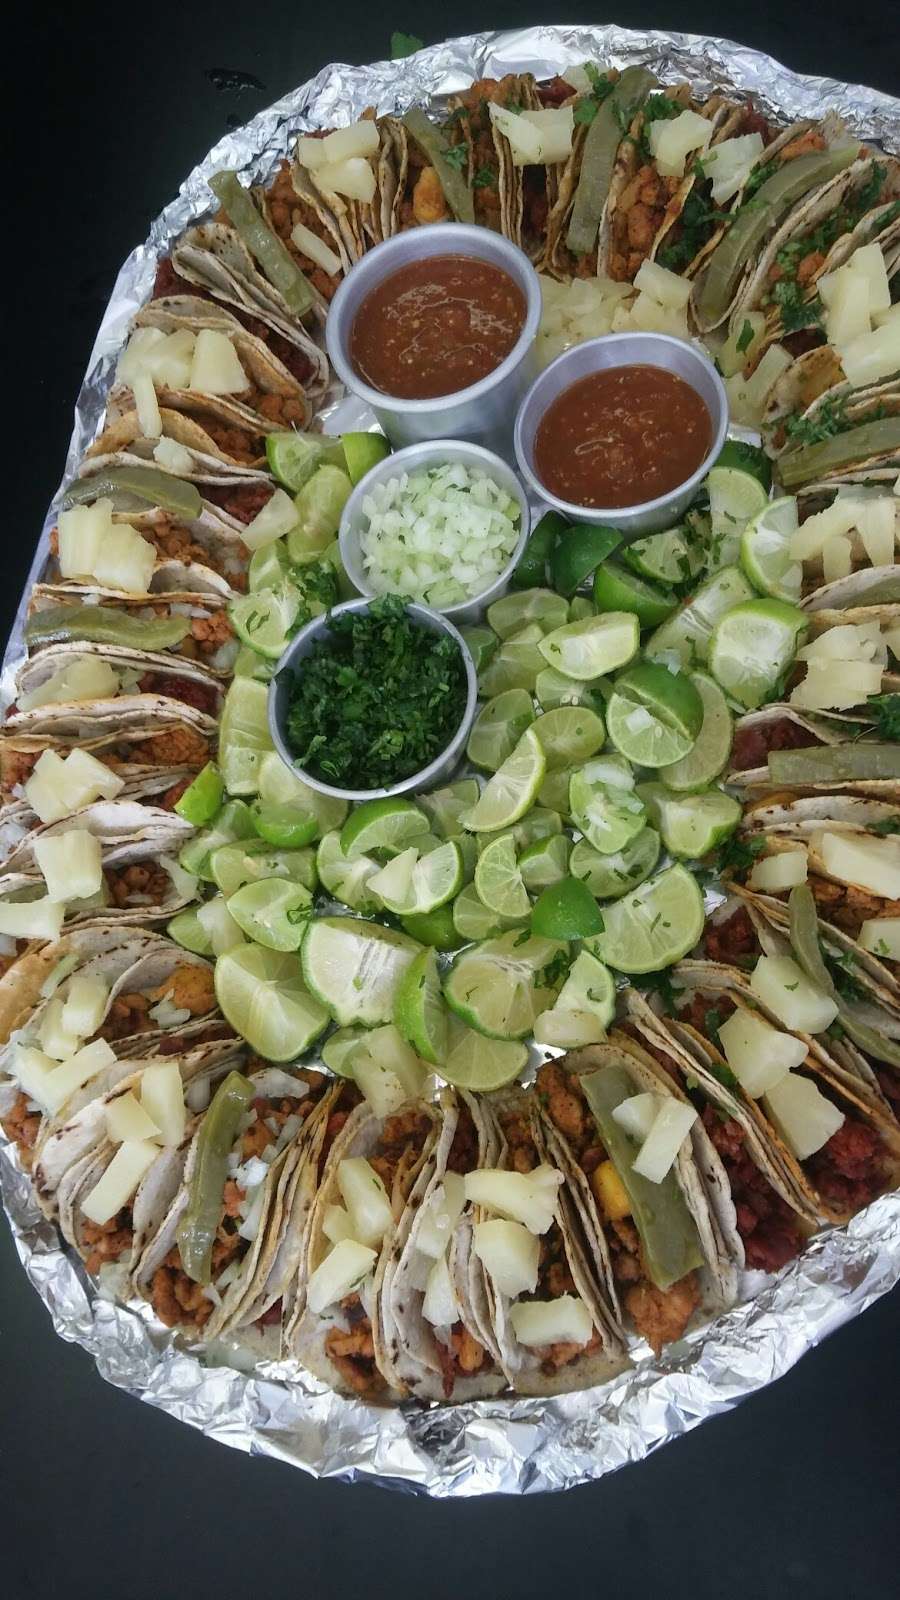 La Cabanita authentic Mexican food and catering | 2720 S Pike Ave, Allentown, PA 18103, USA | Phone: (484) 274-6277